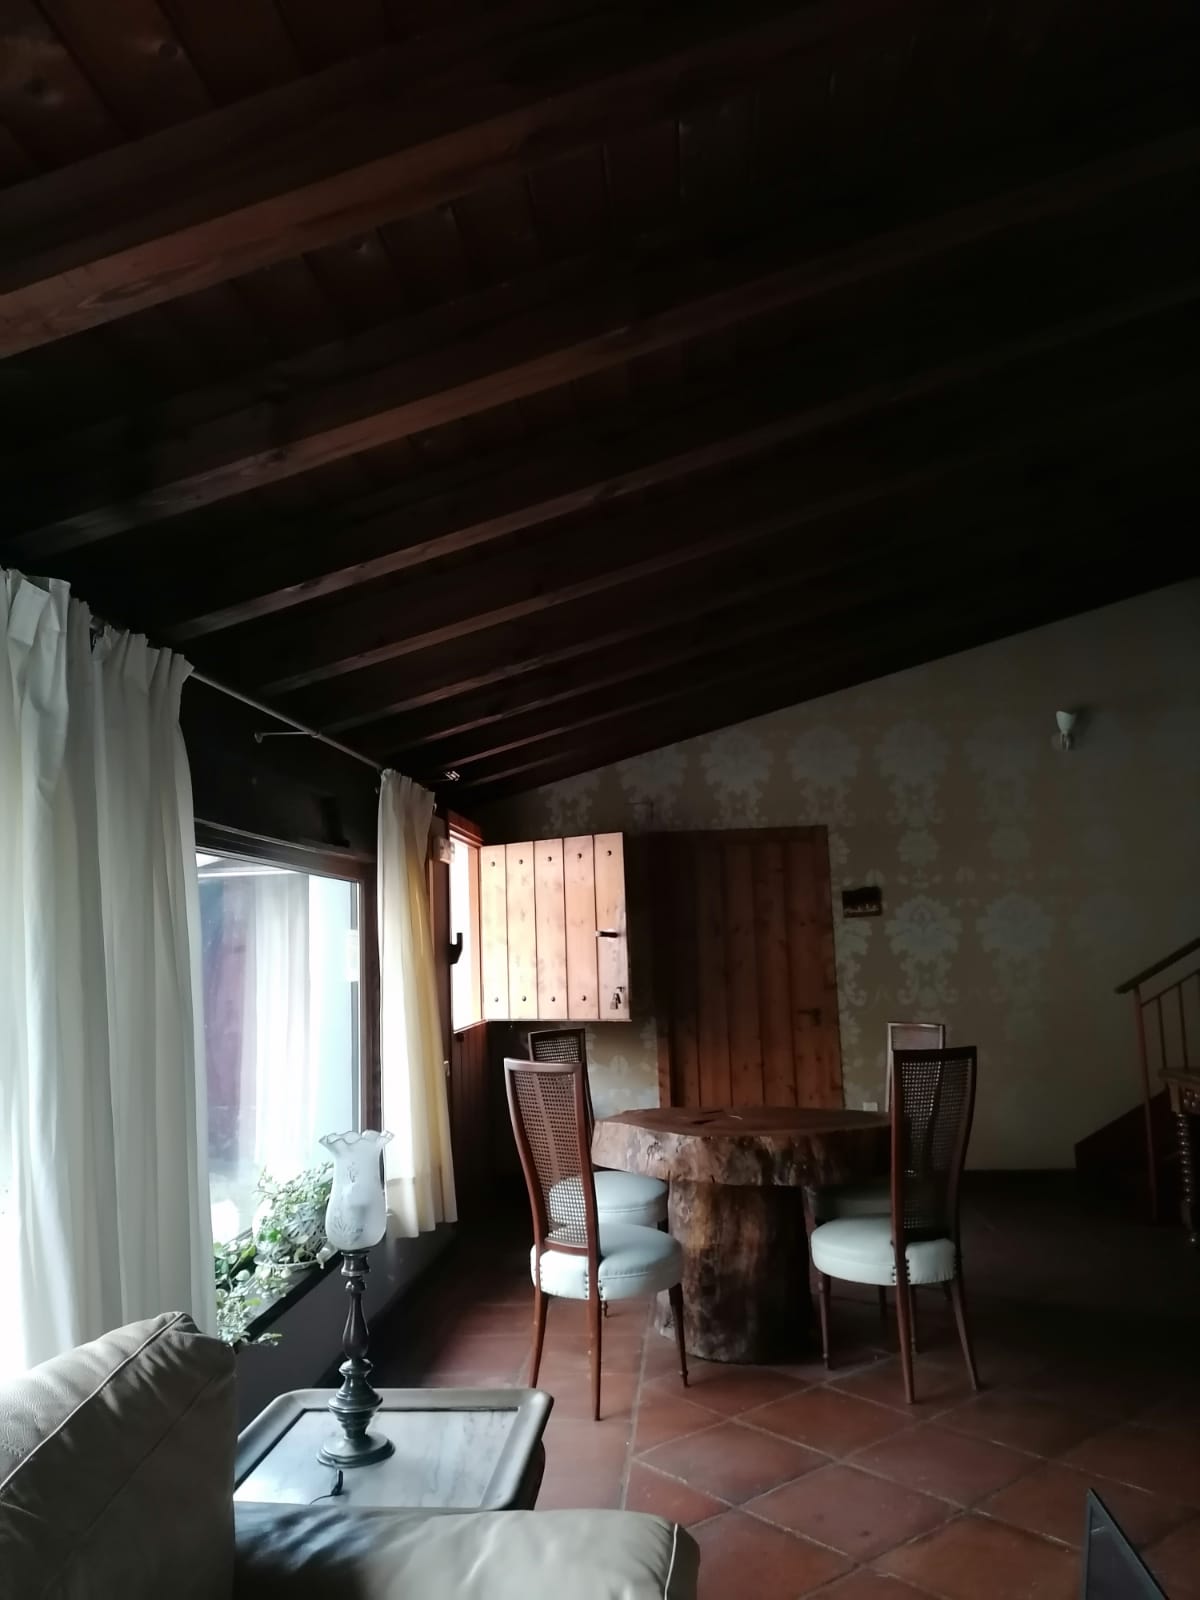 Zumaia - Rustic house for rent in Basque Country